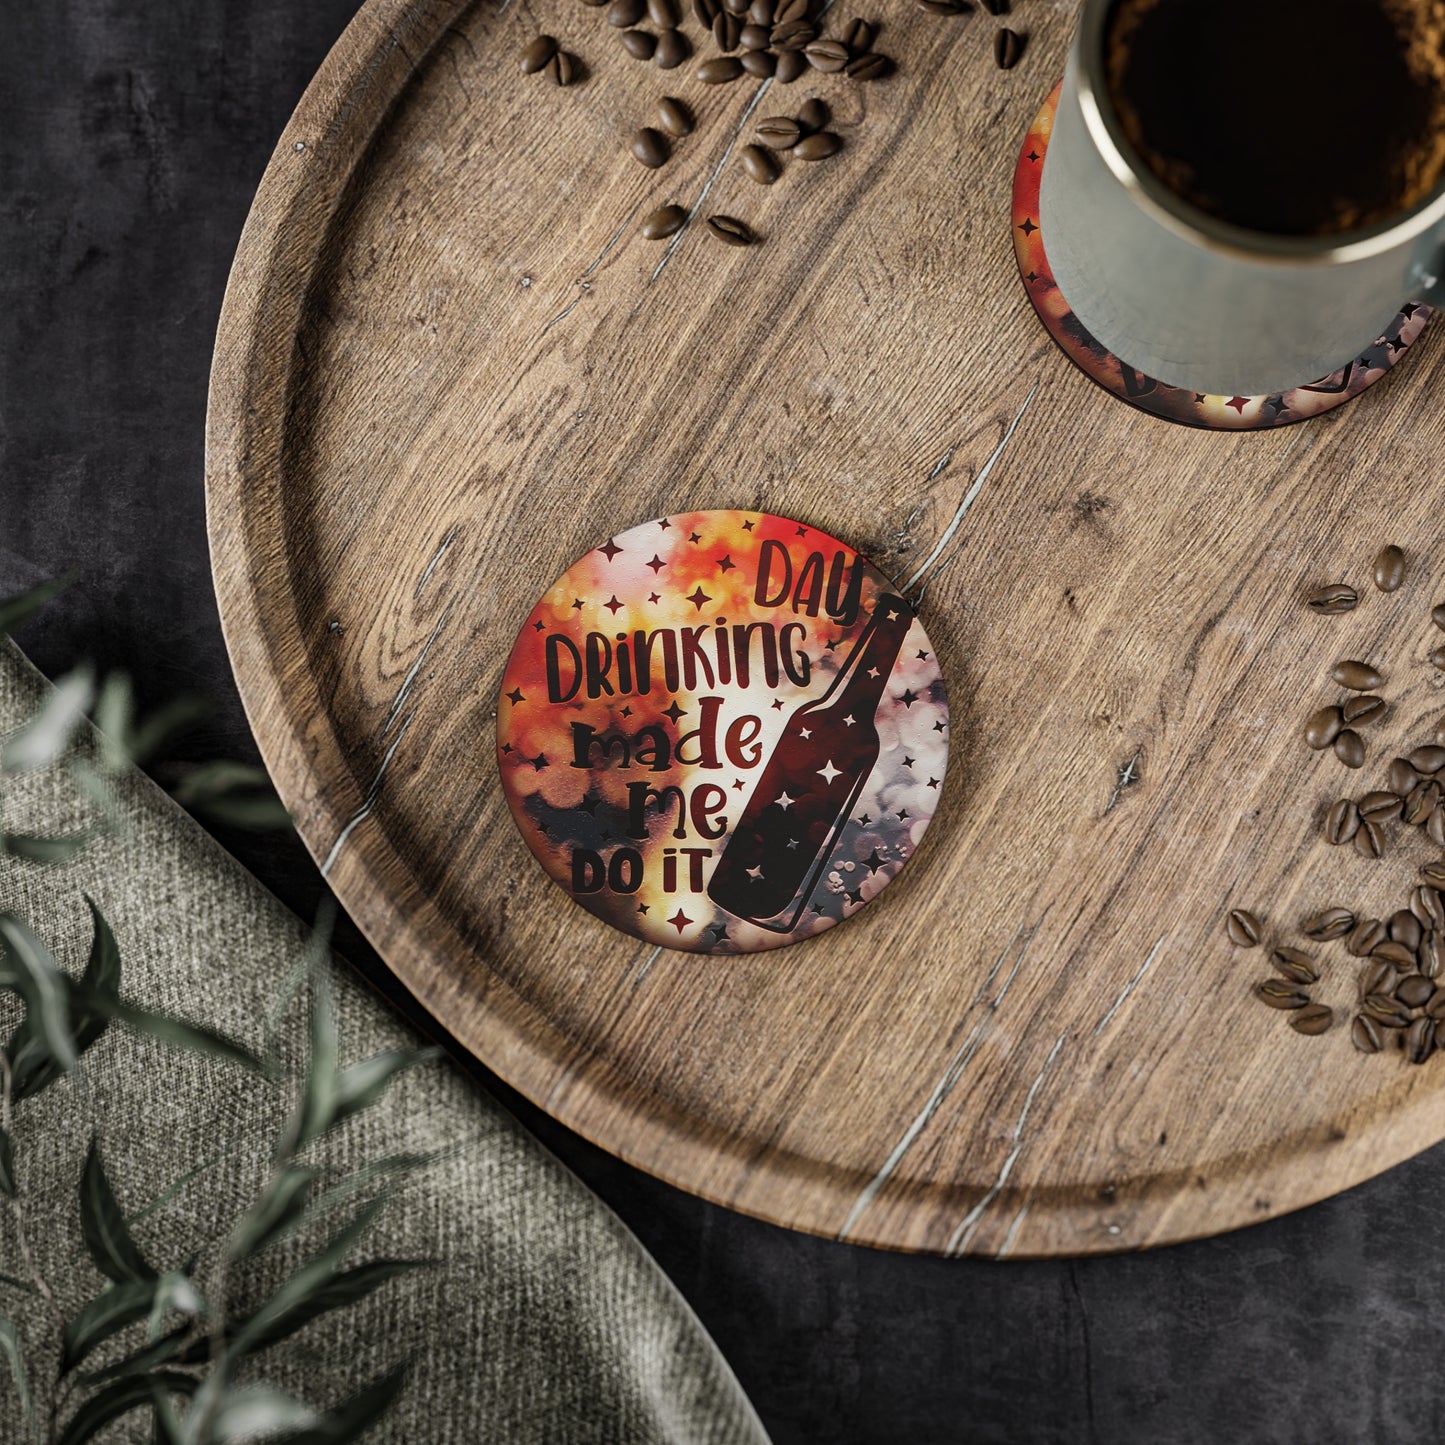 " Day Drinking Made Me Do It " Round Coasters